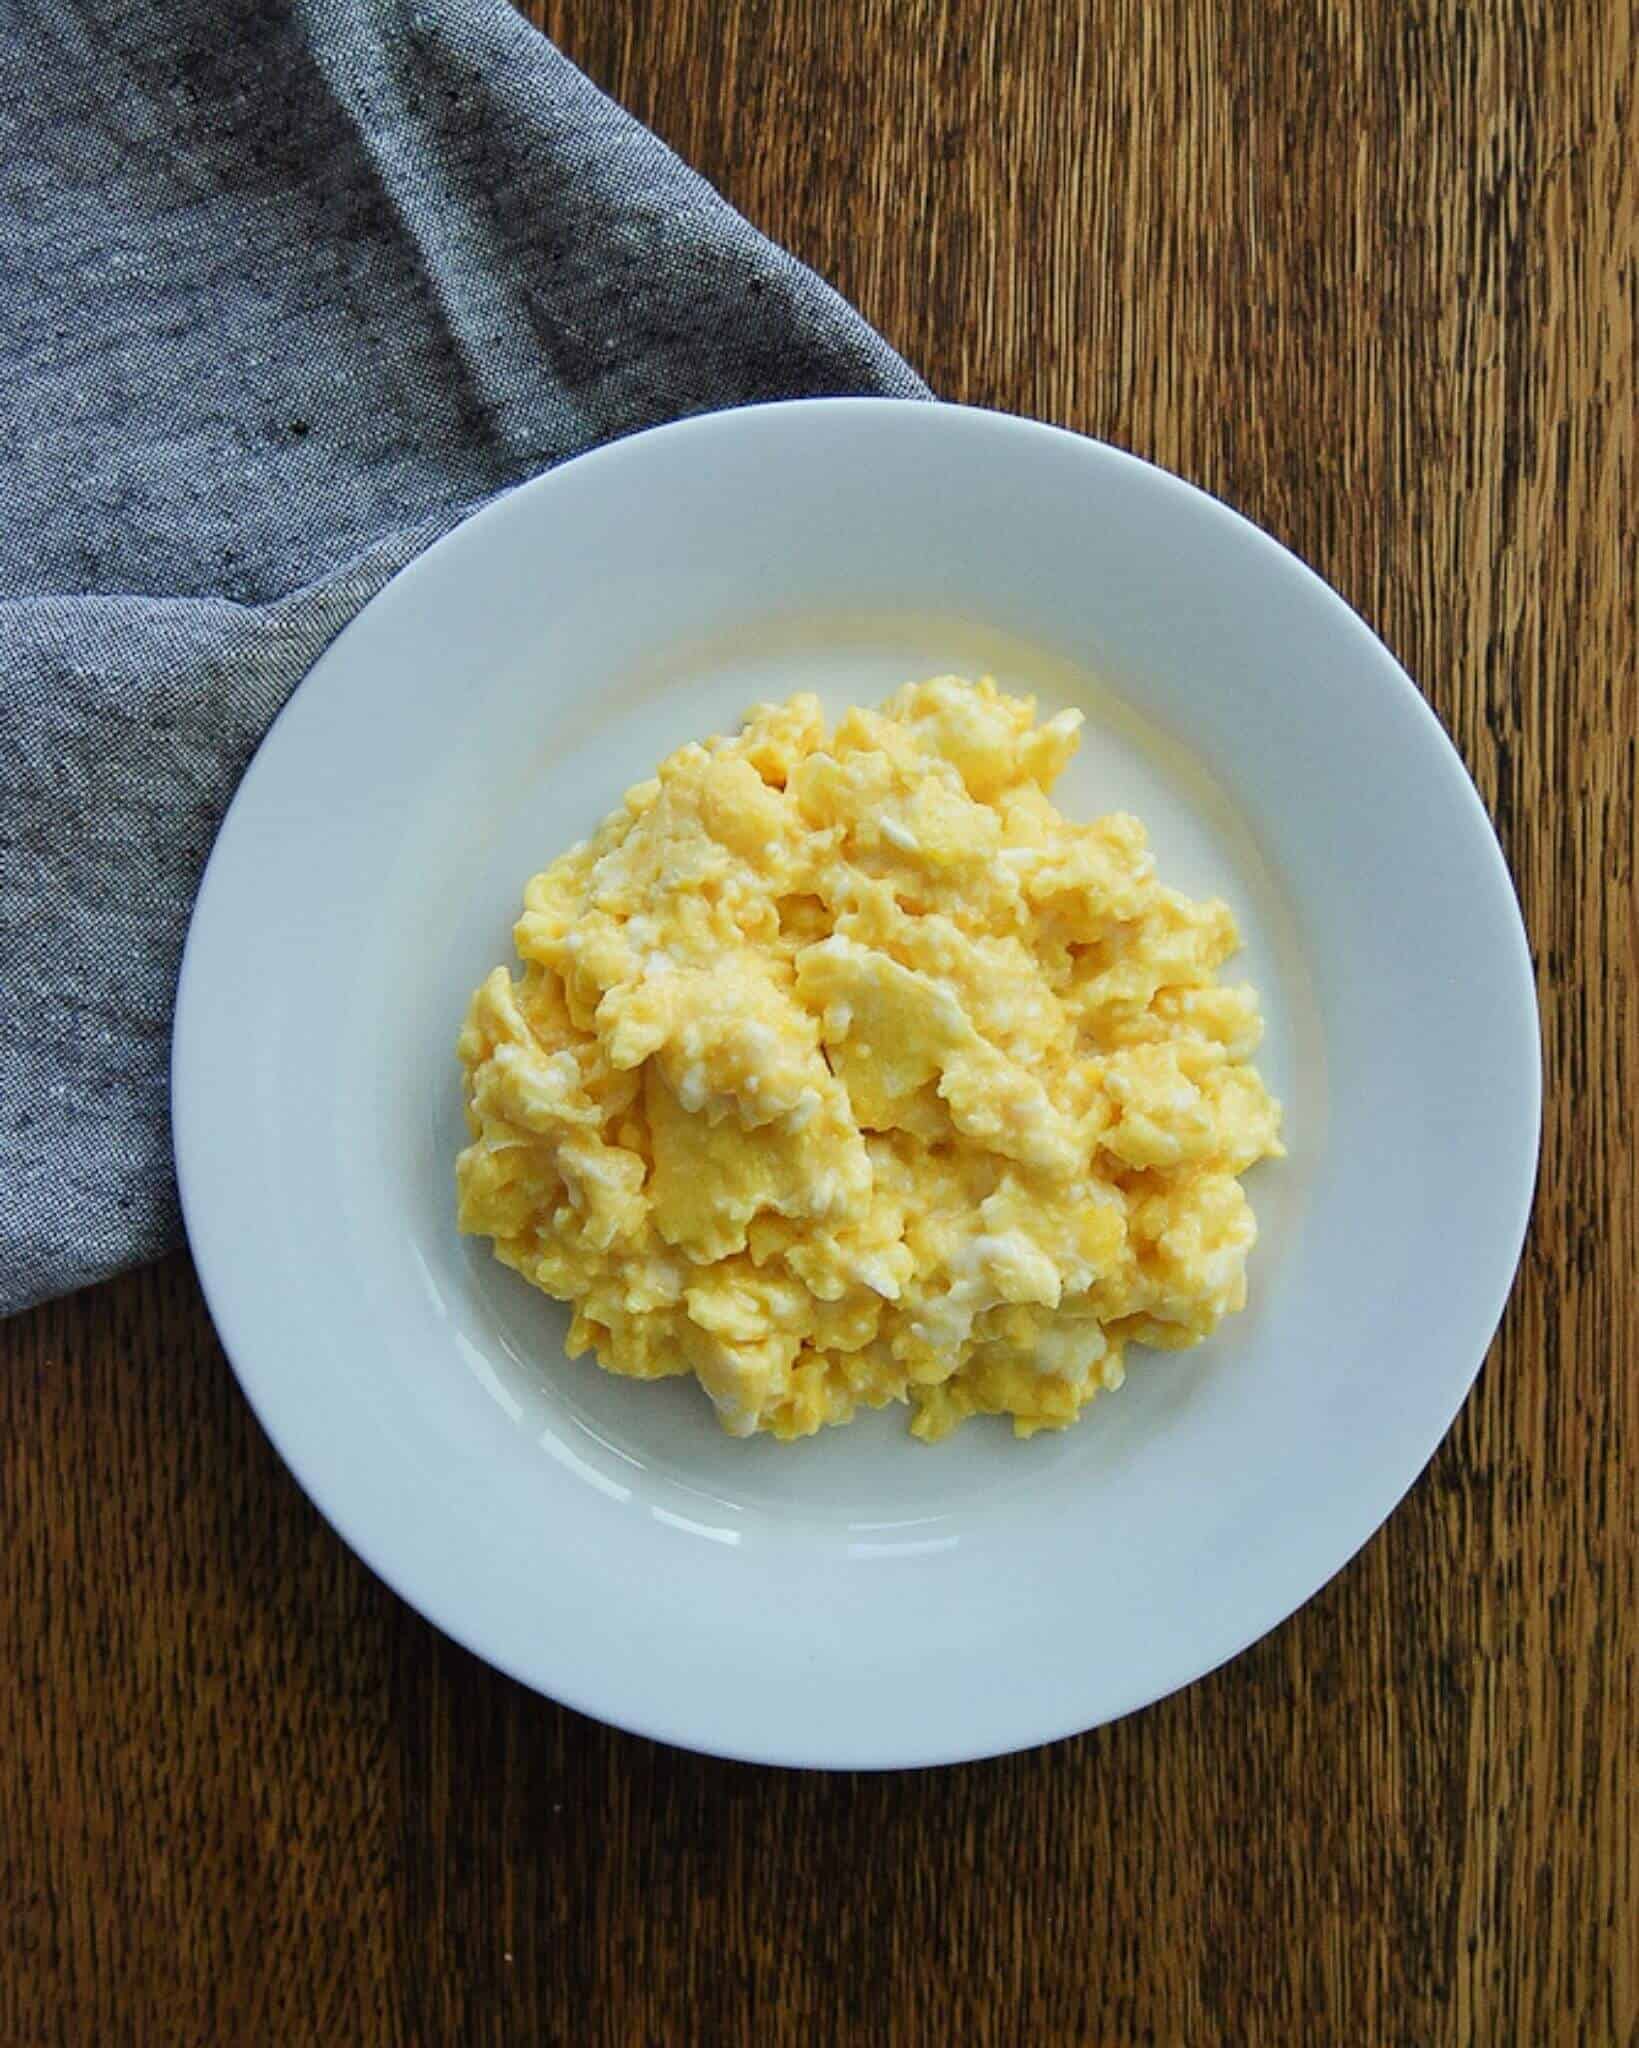 Scrambled eggs on plate with napkin on the side.